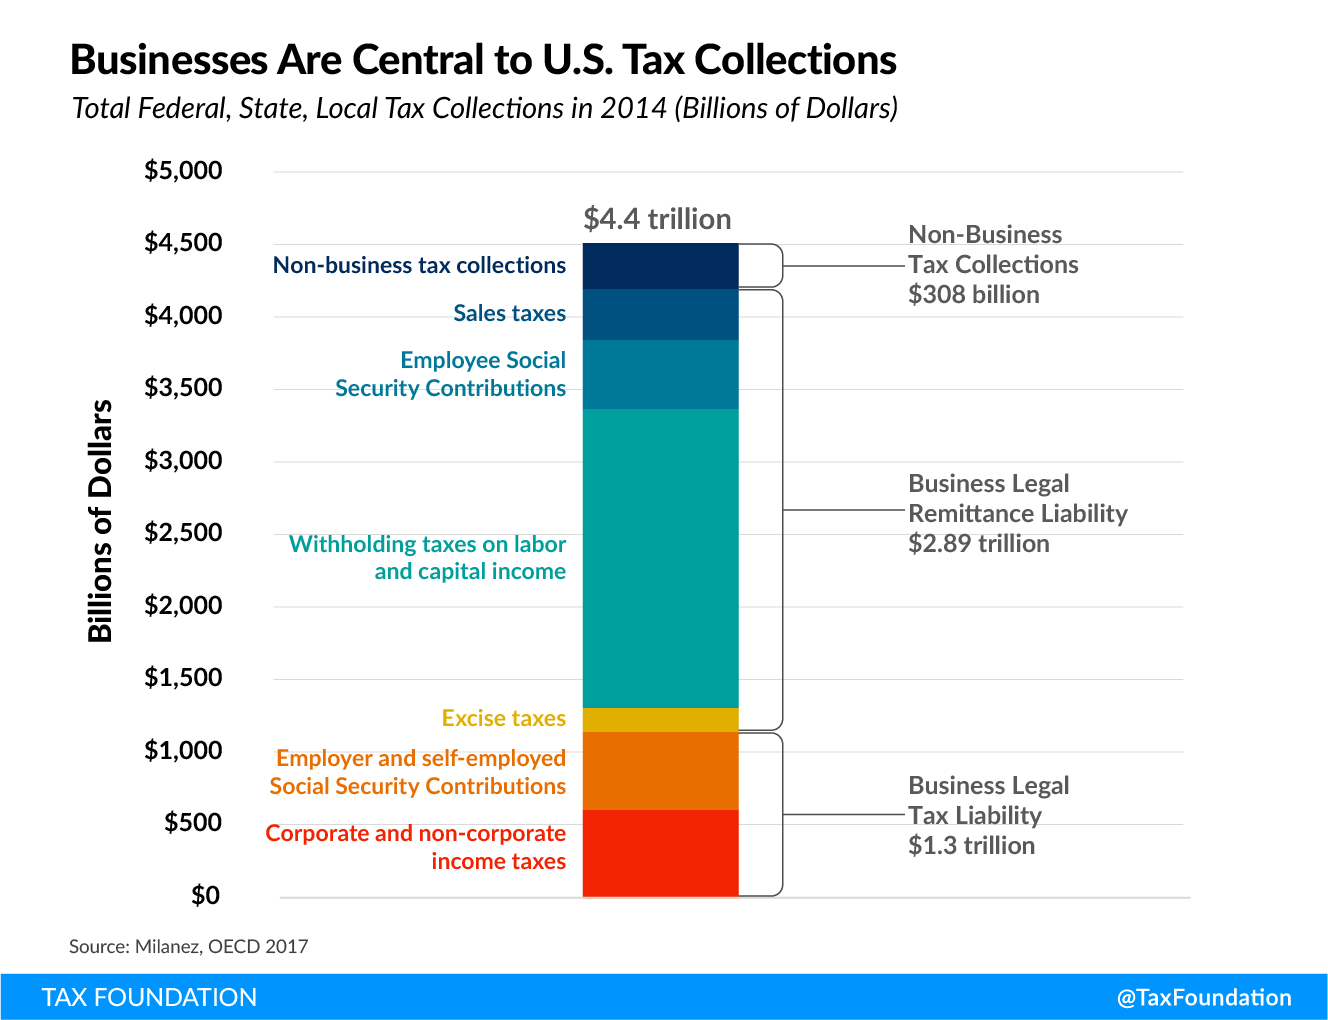 US tax system business dependent, US business tax revenue Tax Fairness, Economic Growth, and Funding Government Investments (Fairer Tax System)